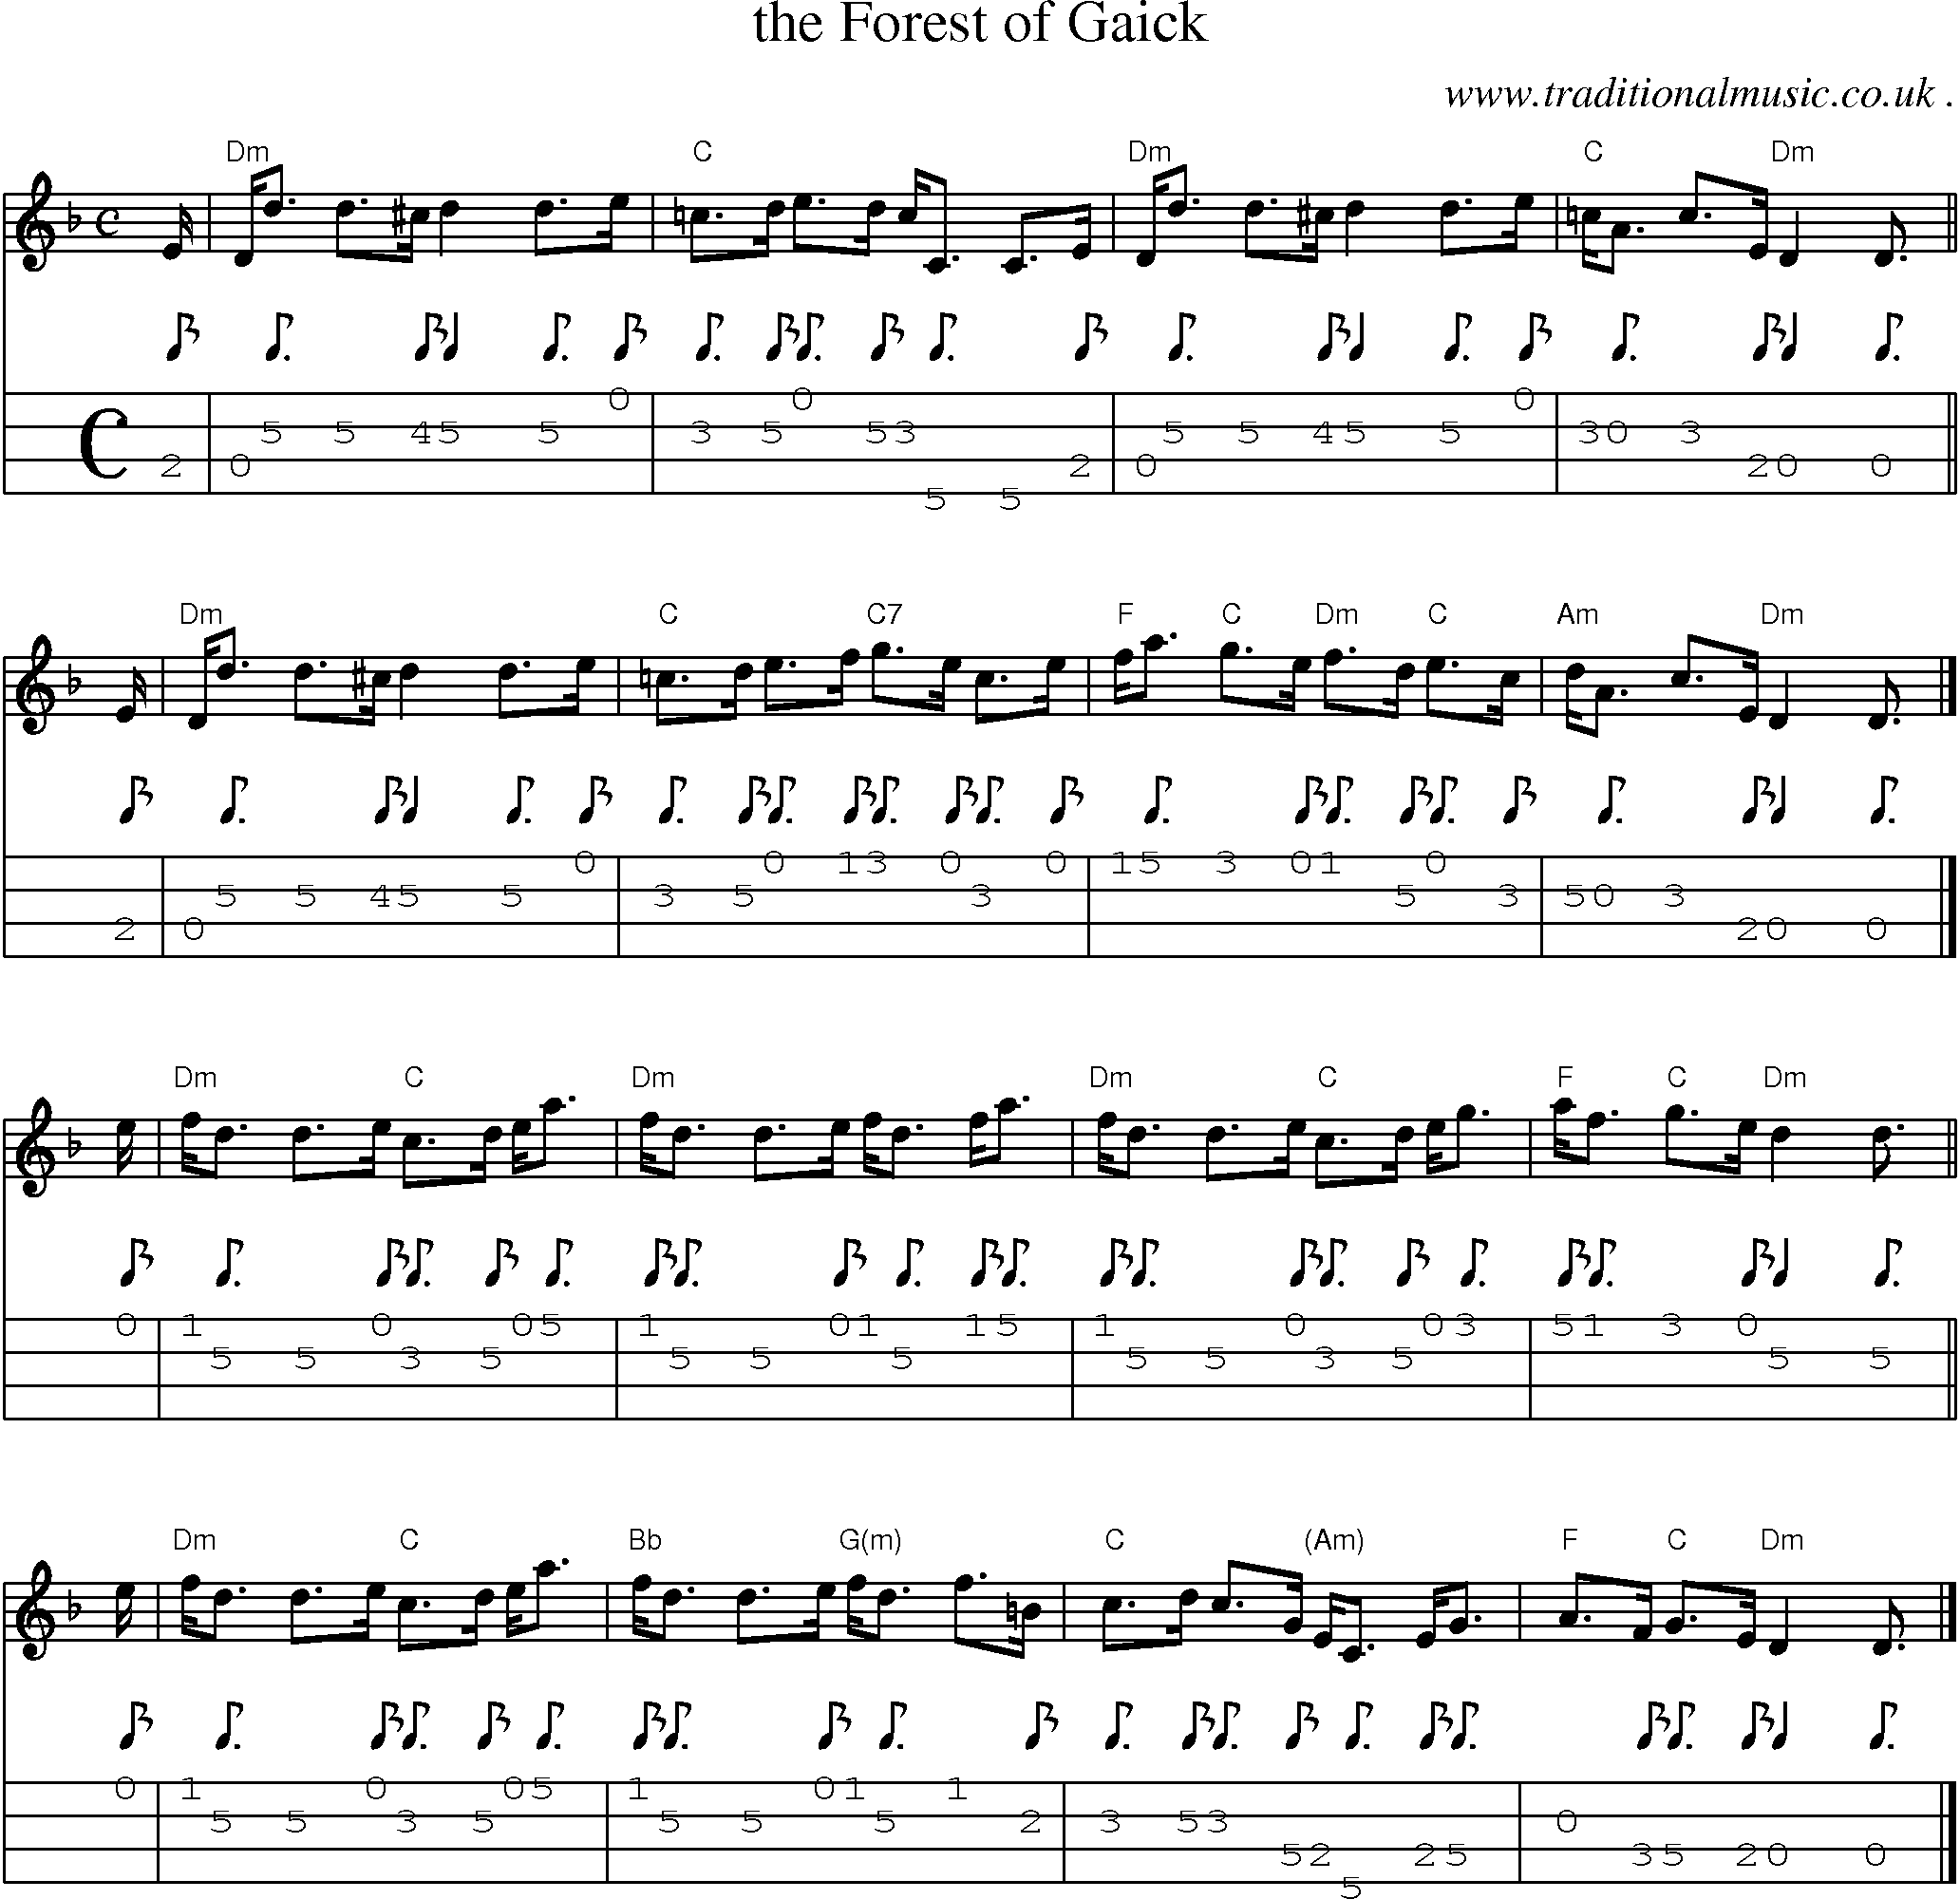 Sheet-music  score, Chords and Mandolin Tabs for The Forest Of Gaick